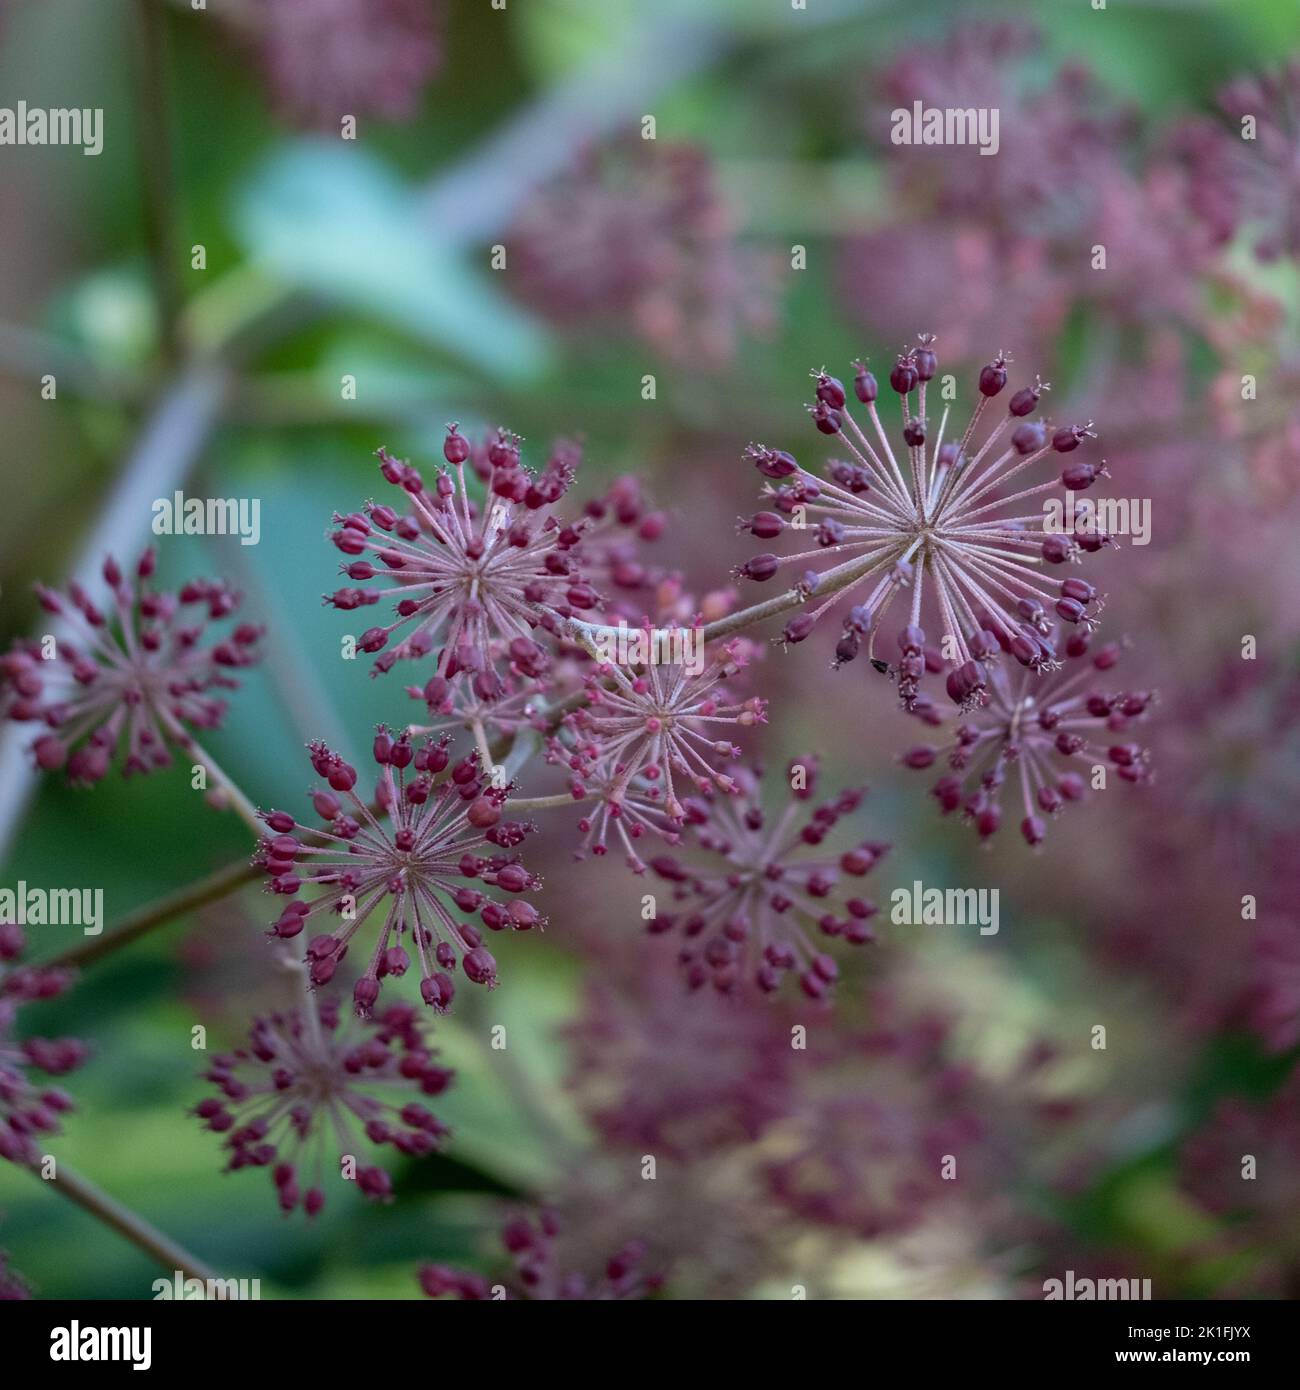 Colourful seed heads amongst foliage on a shrub, photographed in autumn in a garden in Wisley, Surrey UK. Stock Photo